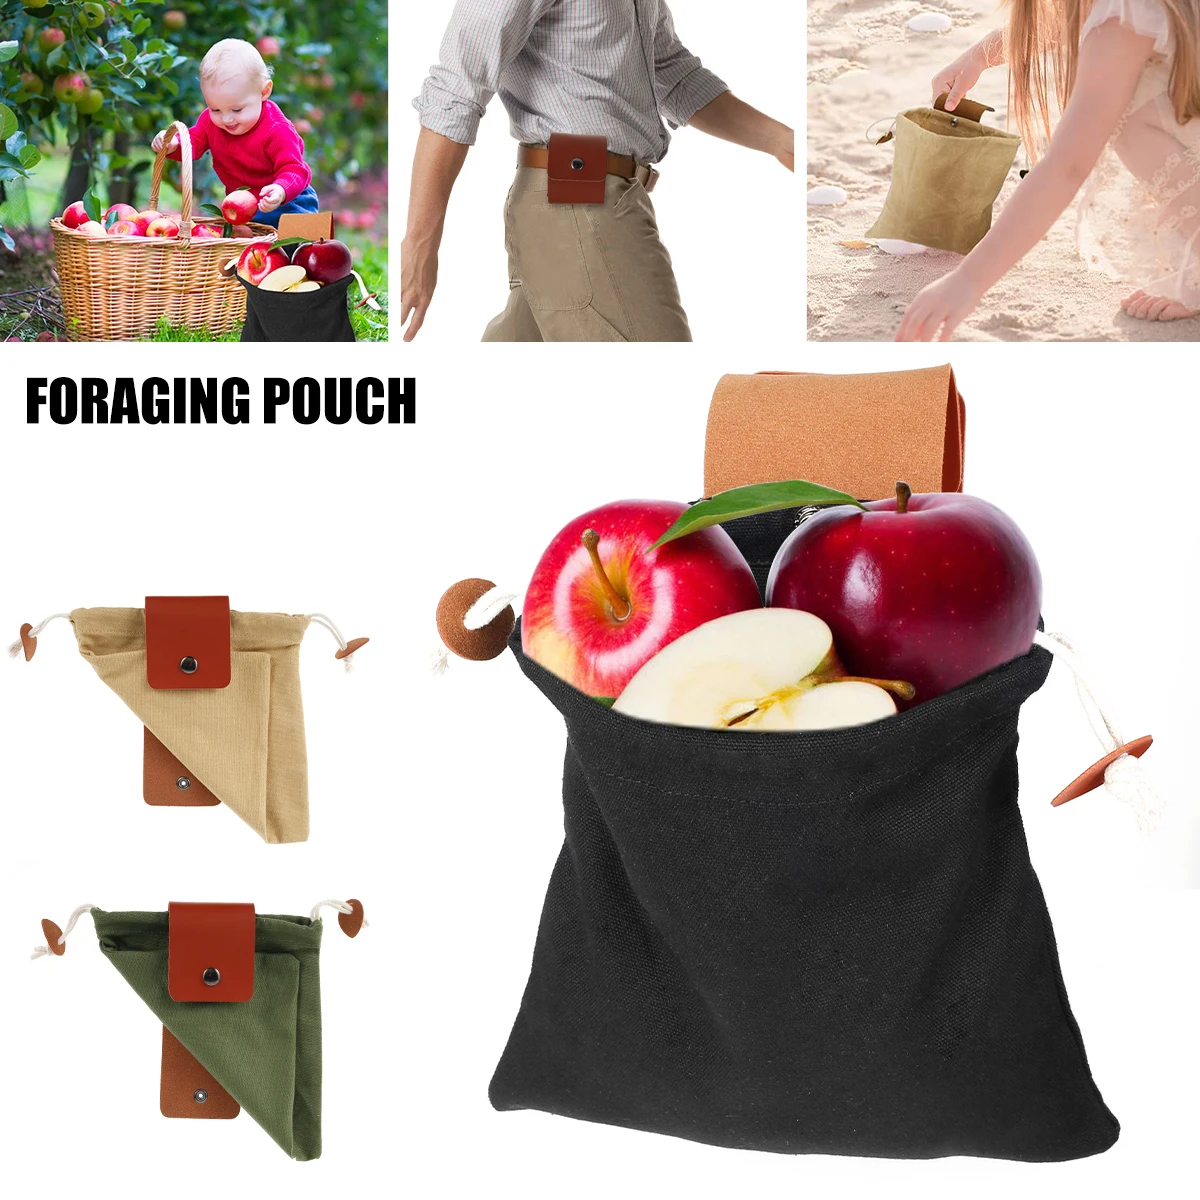 

Collapsible Outdoor Camping Foraging Pouch Bag Oxford Cloth Mushroom Foraging Foraging Bag Hunting Foraging Fanny Pack Universal